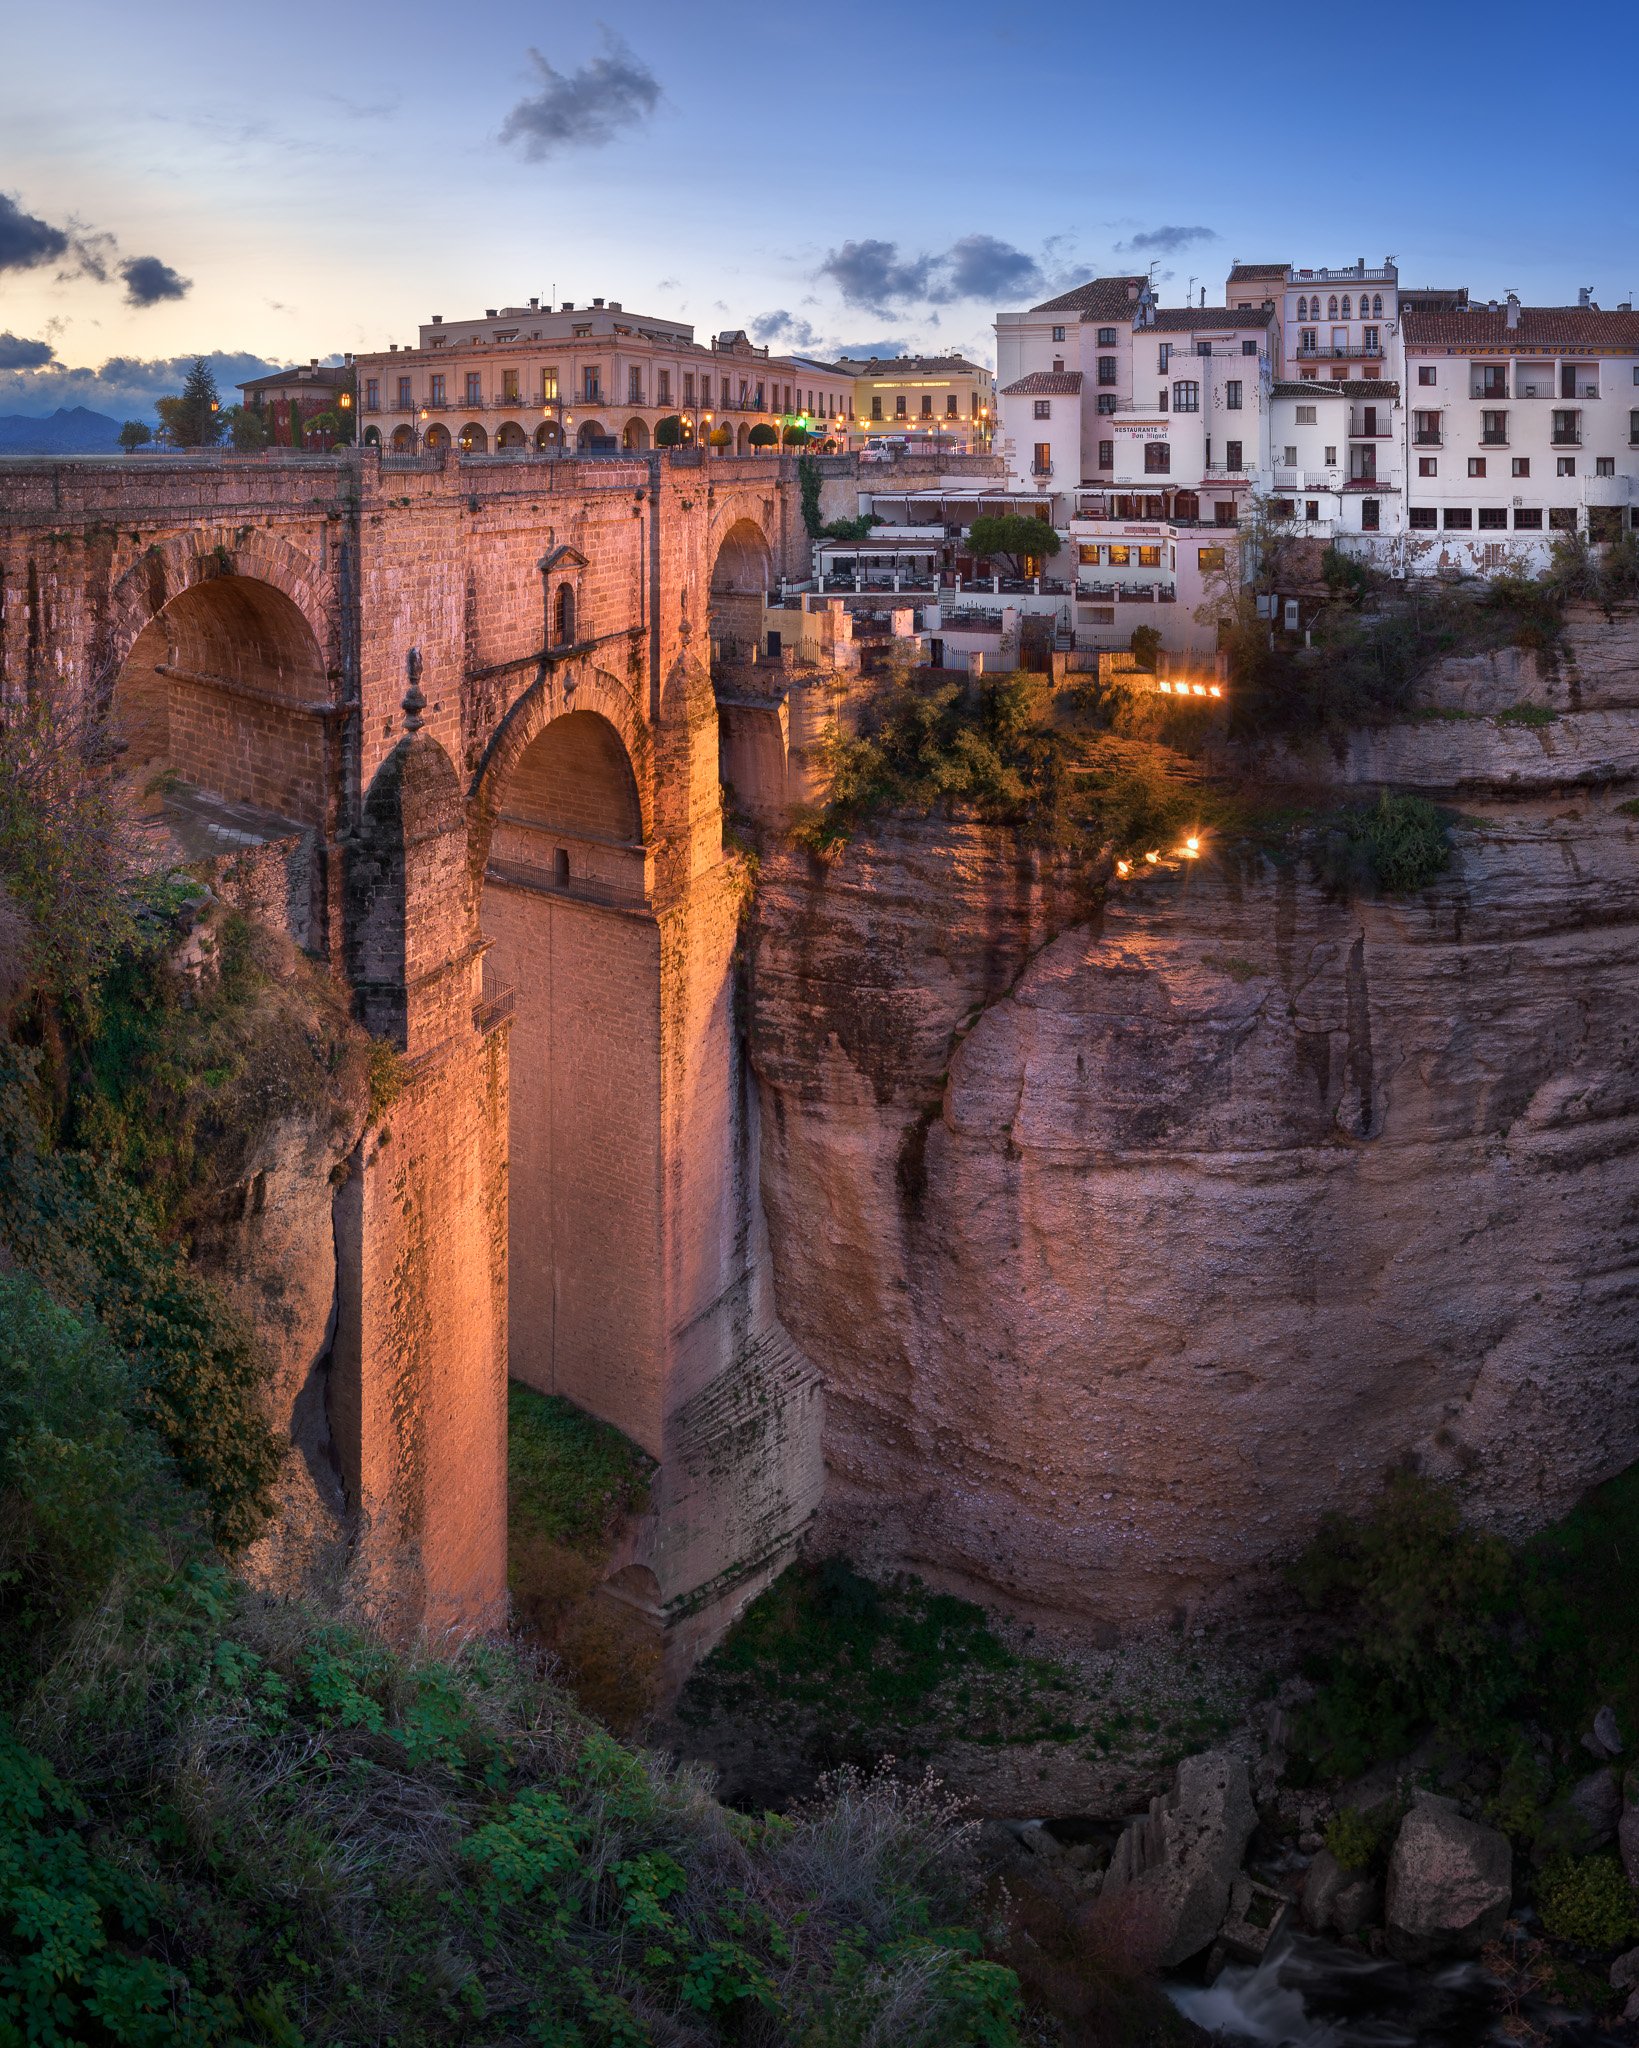 ancient, andalucia, andalusia, antique, arch, architecture, blue, bridge, building, canyon, chasm, city, cityscape, cliff, dusk, europe, european, evening, gorge, high, hill, historic, historical, history, house, iberia, iconic, illuminated, landmark, lan, Andrey Omelyanchuk